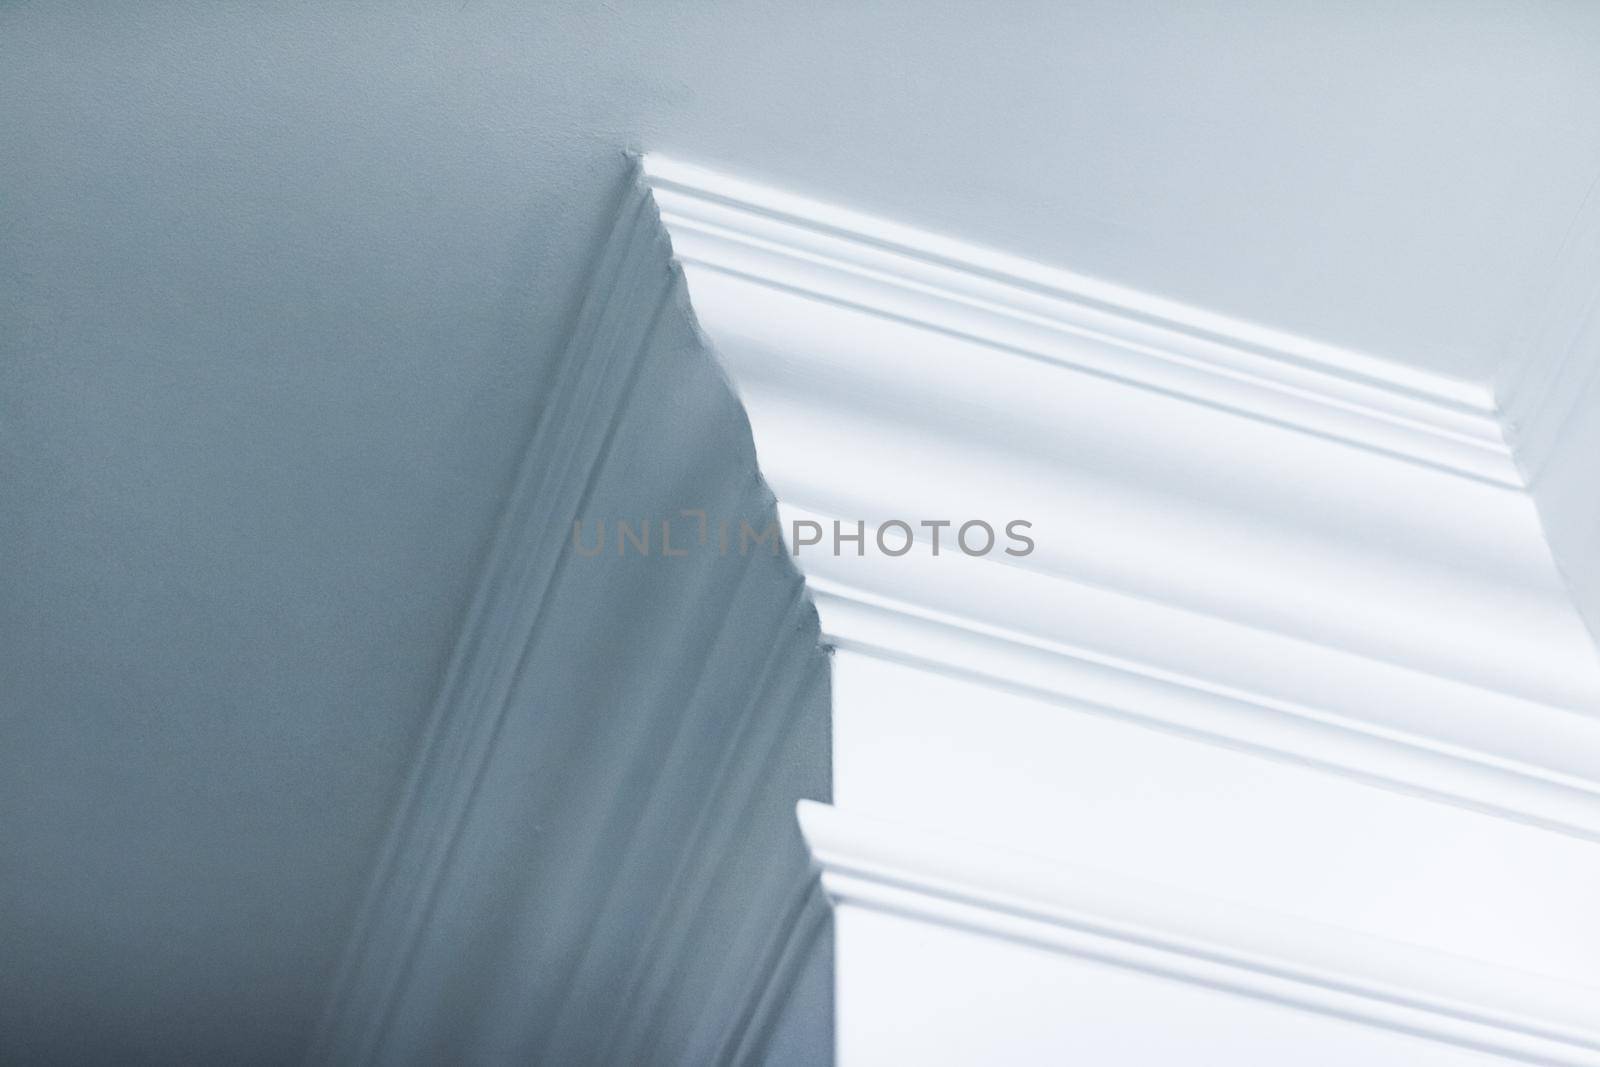 House renovation, home decoration and real estate concept - Molding on ceiling detail, interior design and architectural abstract background